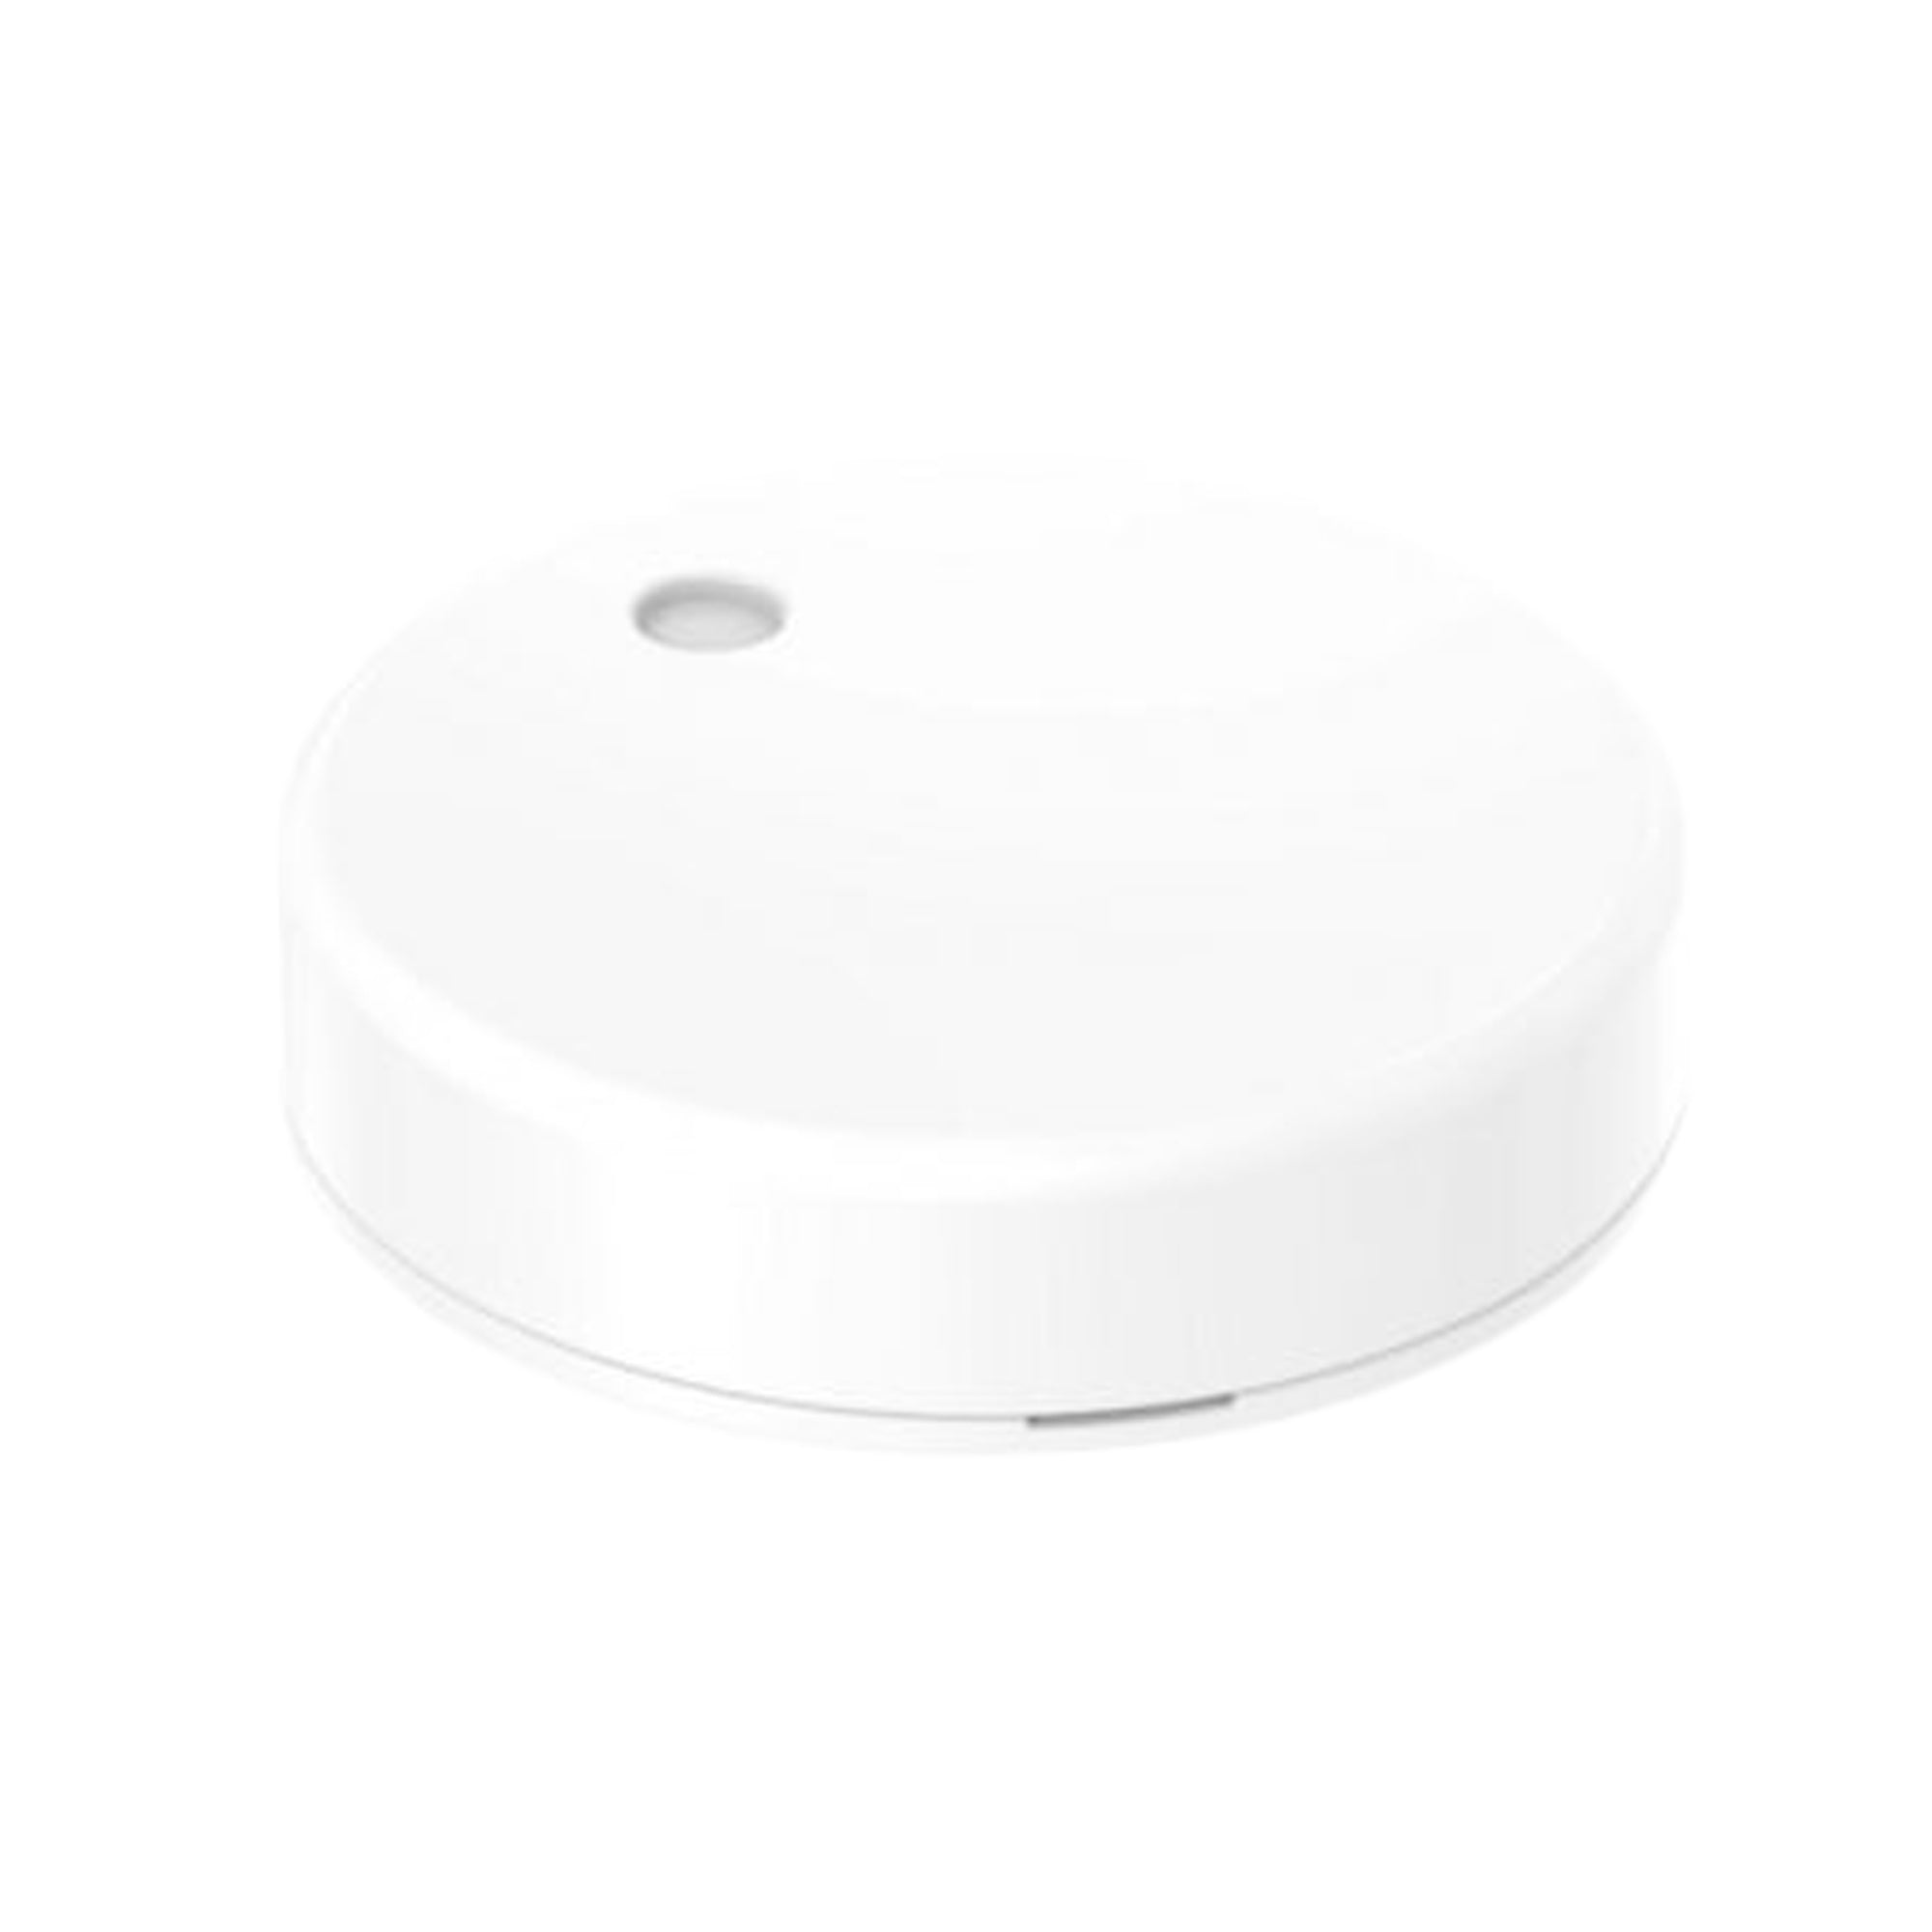 ThermoSphere Wireless Temperature & Humidity Sensor for BT21